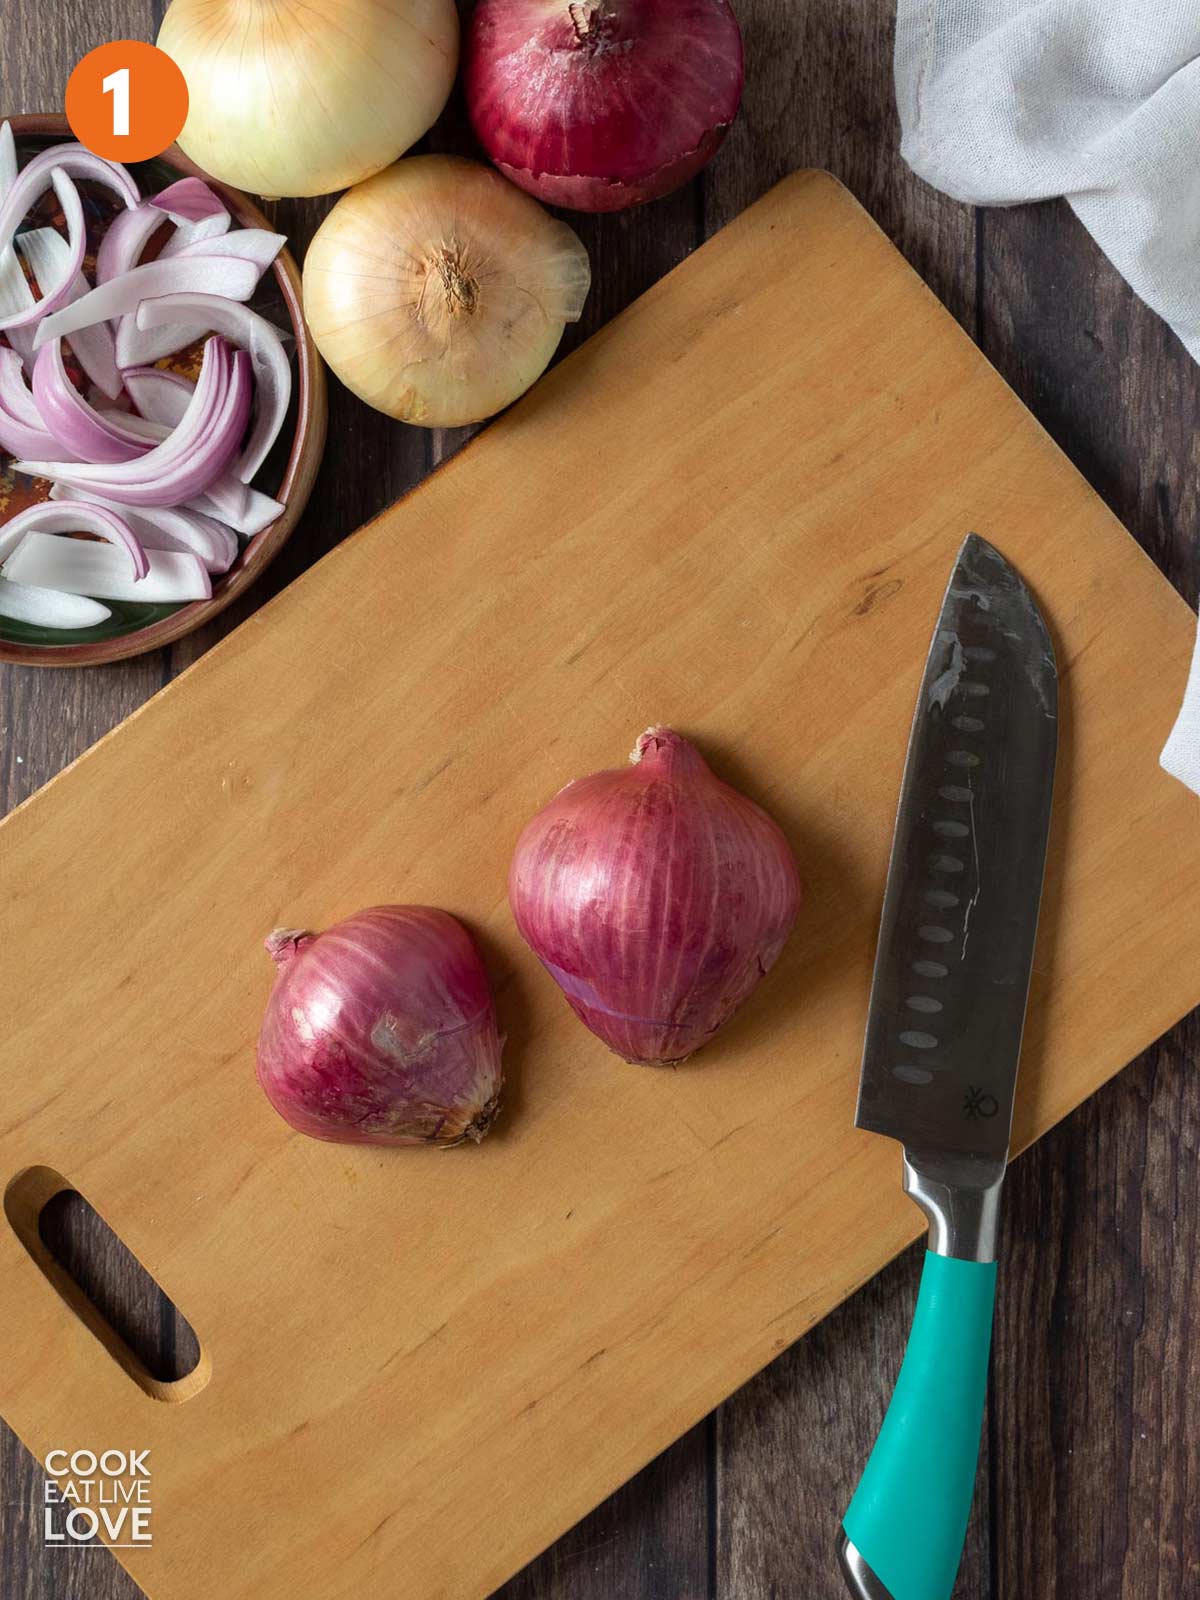 Onion cut in half with flat side down and a knife next to it on the cutting board.